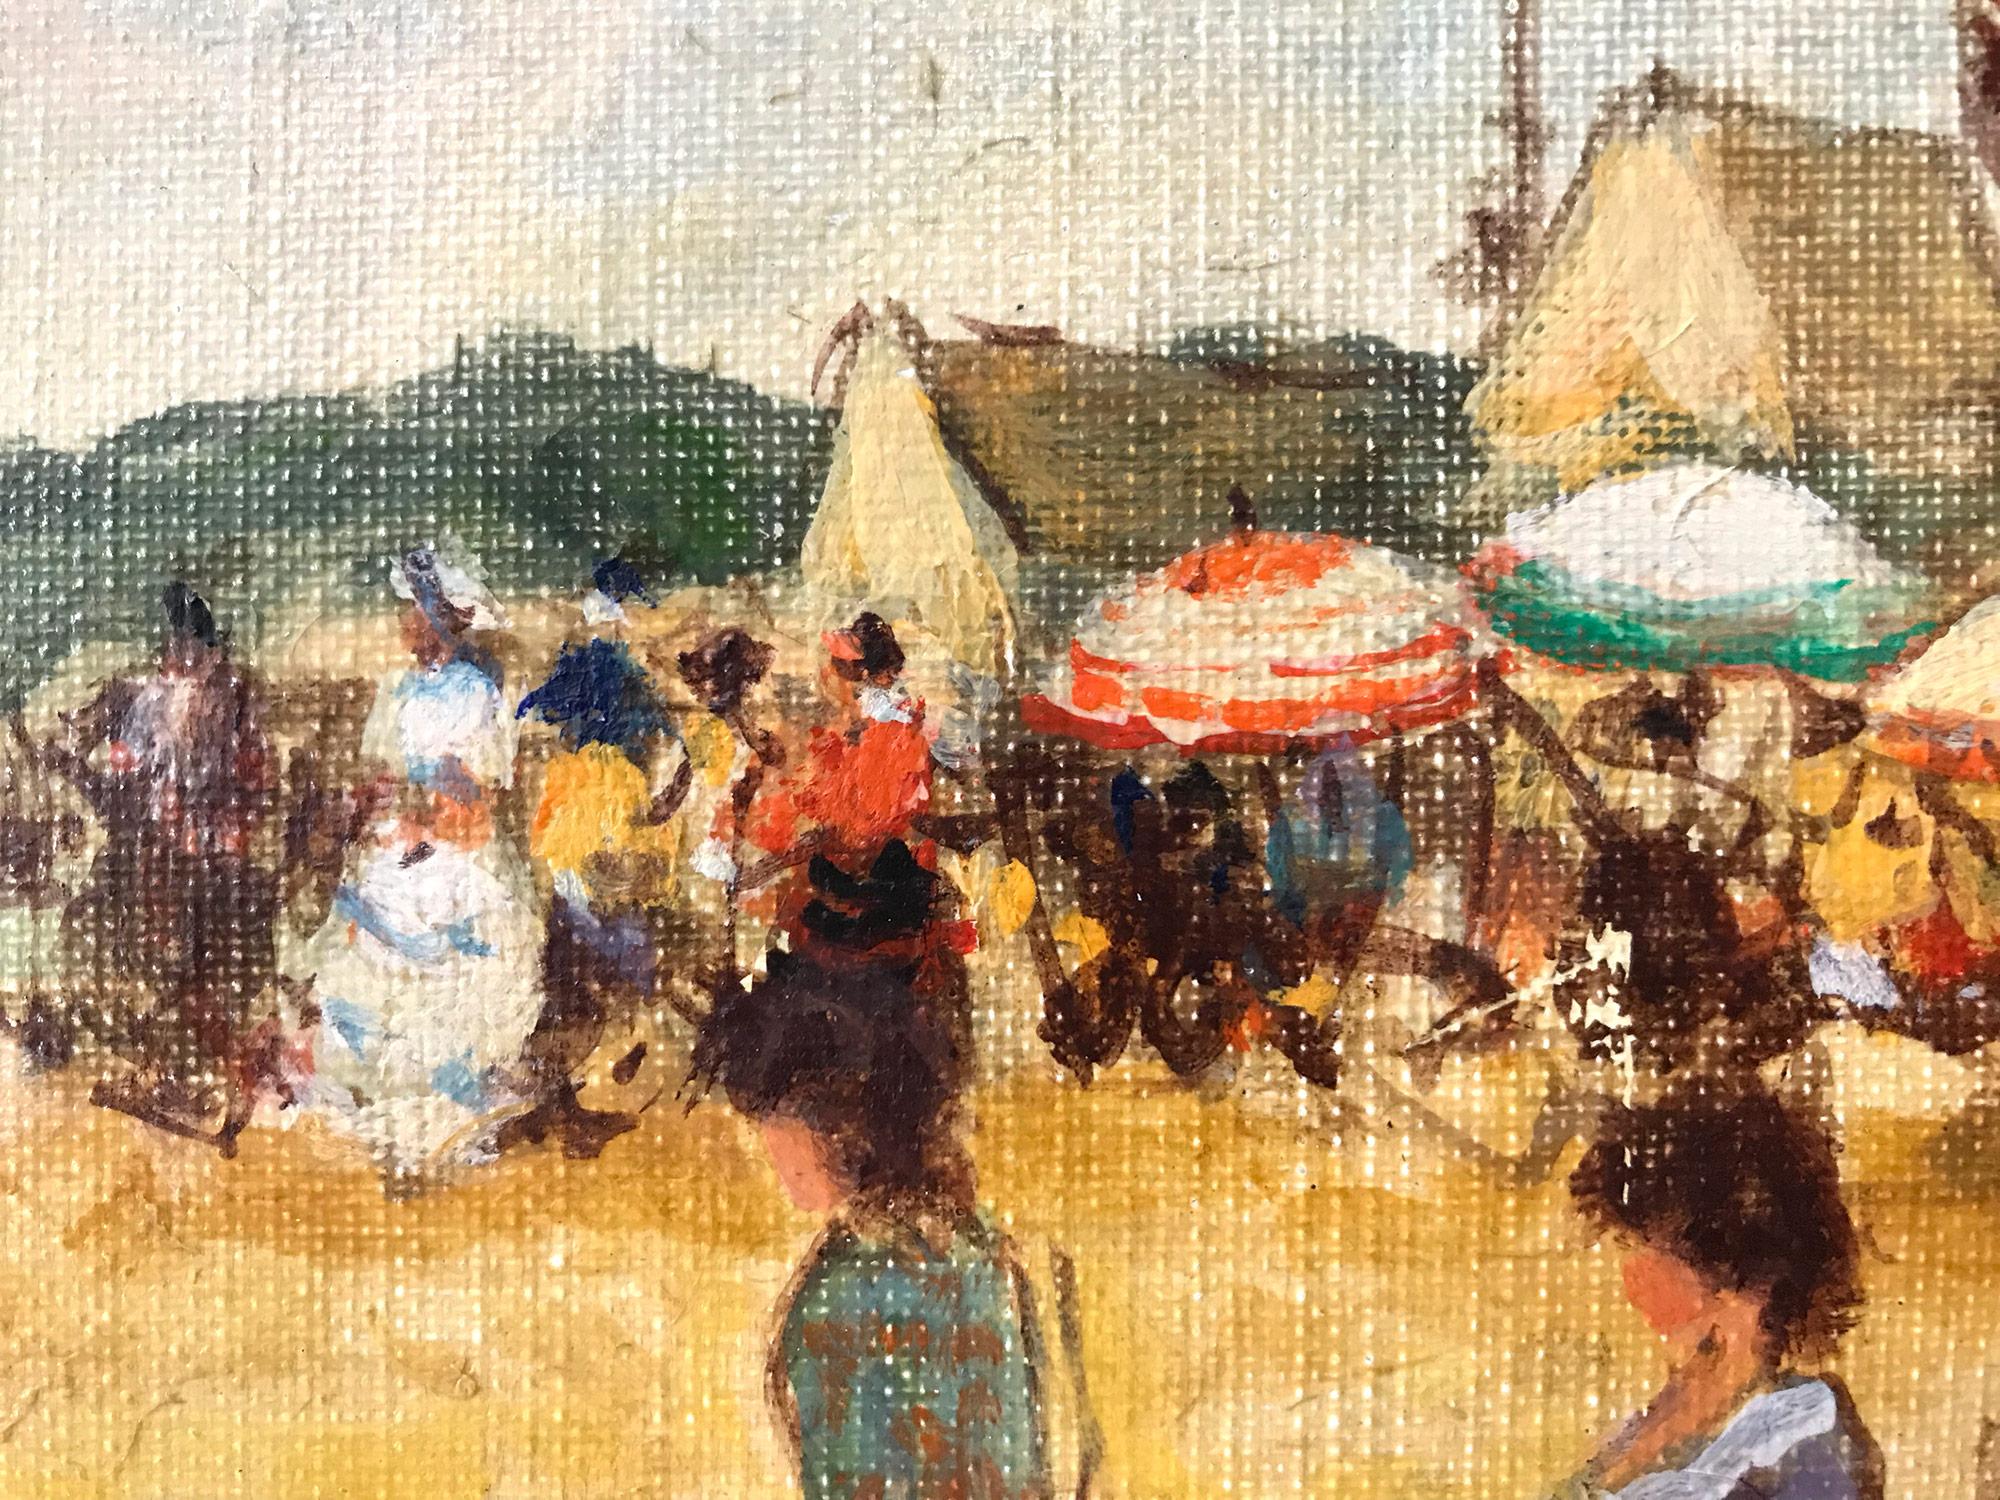 A stunning oil painting depicting figures at the beach in the 20th Century. Demarest was known for her charming intimate figurative scenes portraying life in the North East. She was profoundly active, picking up her subjects from the beaches, parks,